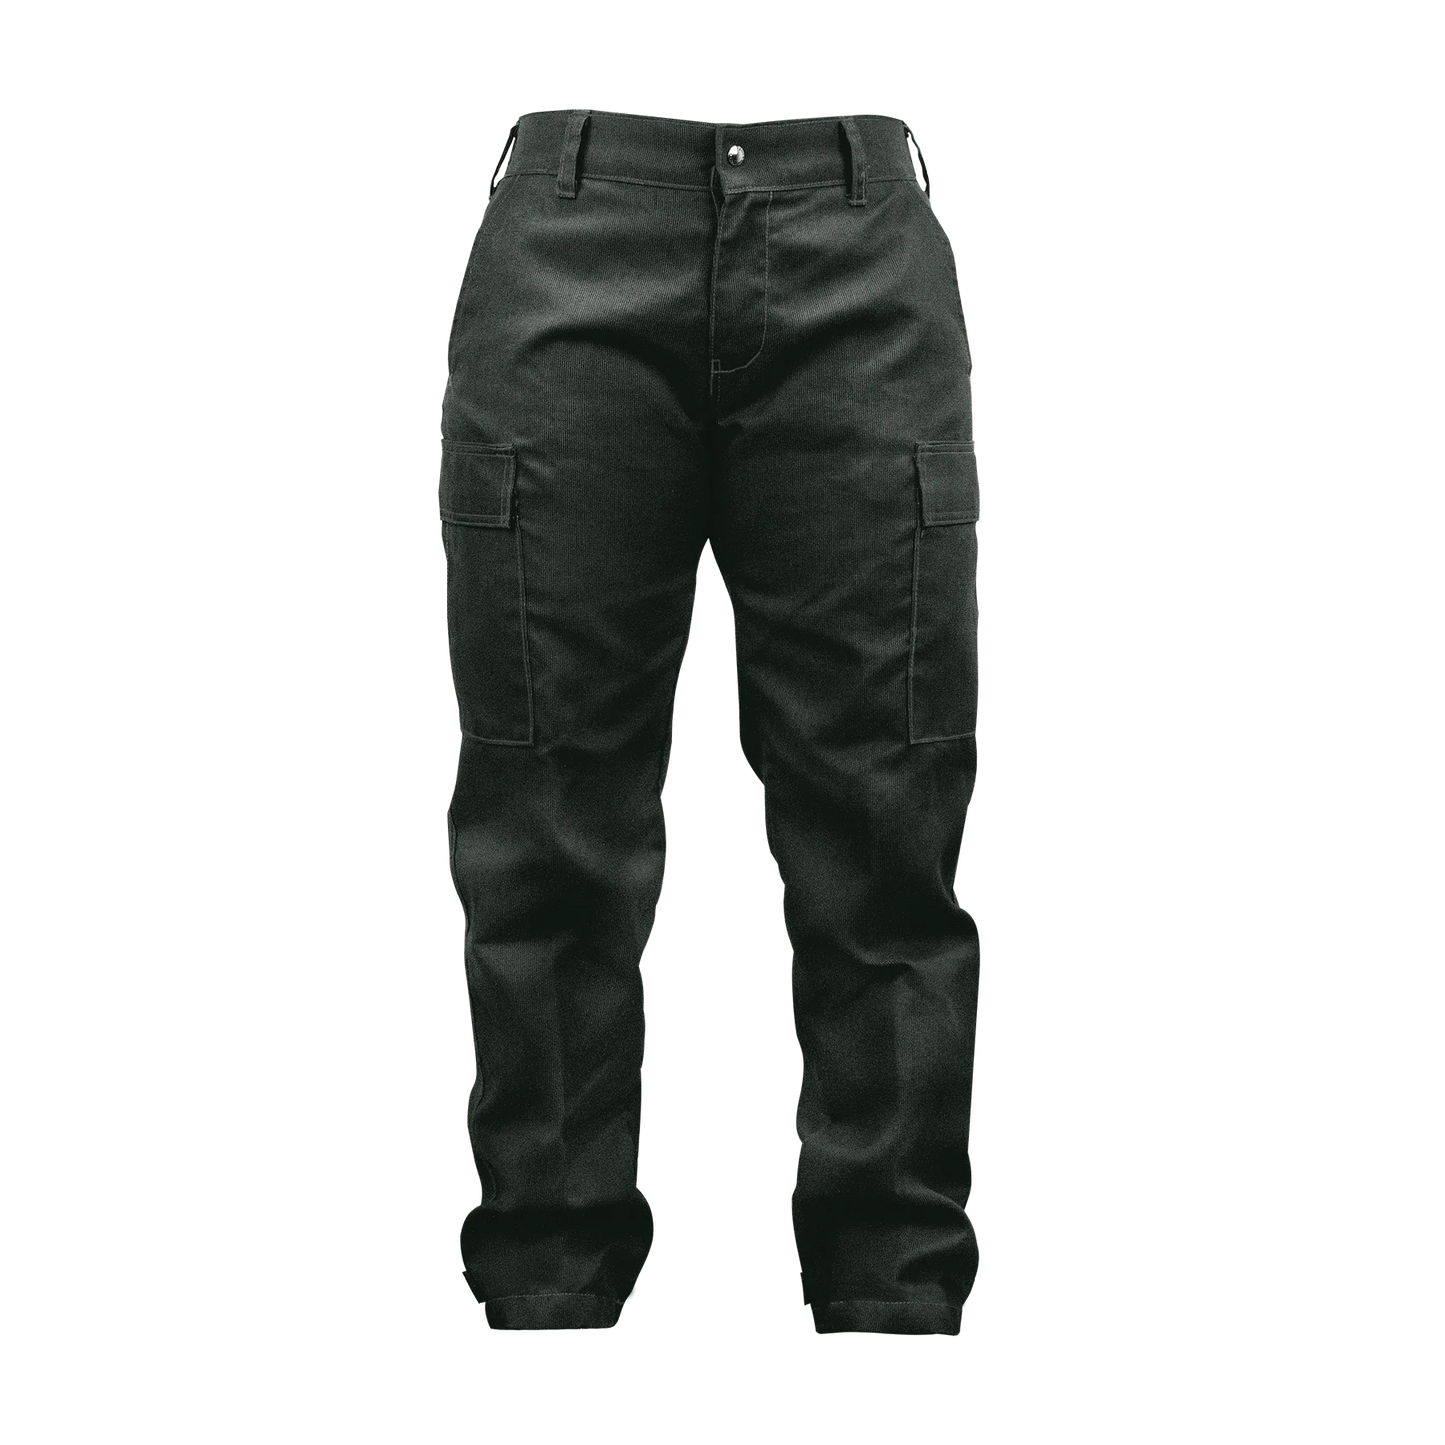 Women's Wildland Ember Brush Pant in NOMEX, ADVANCE, and PIONEER Material